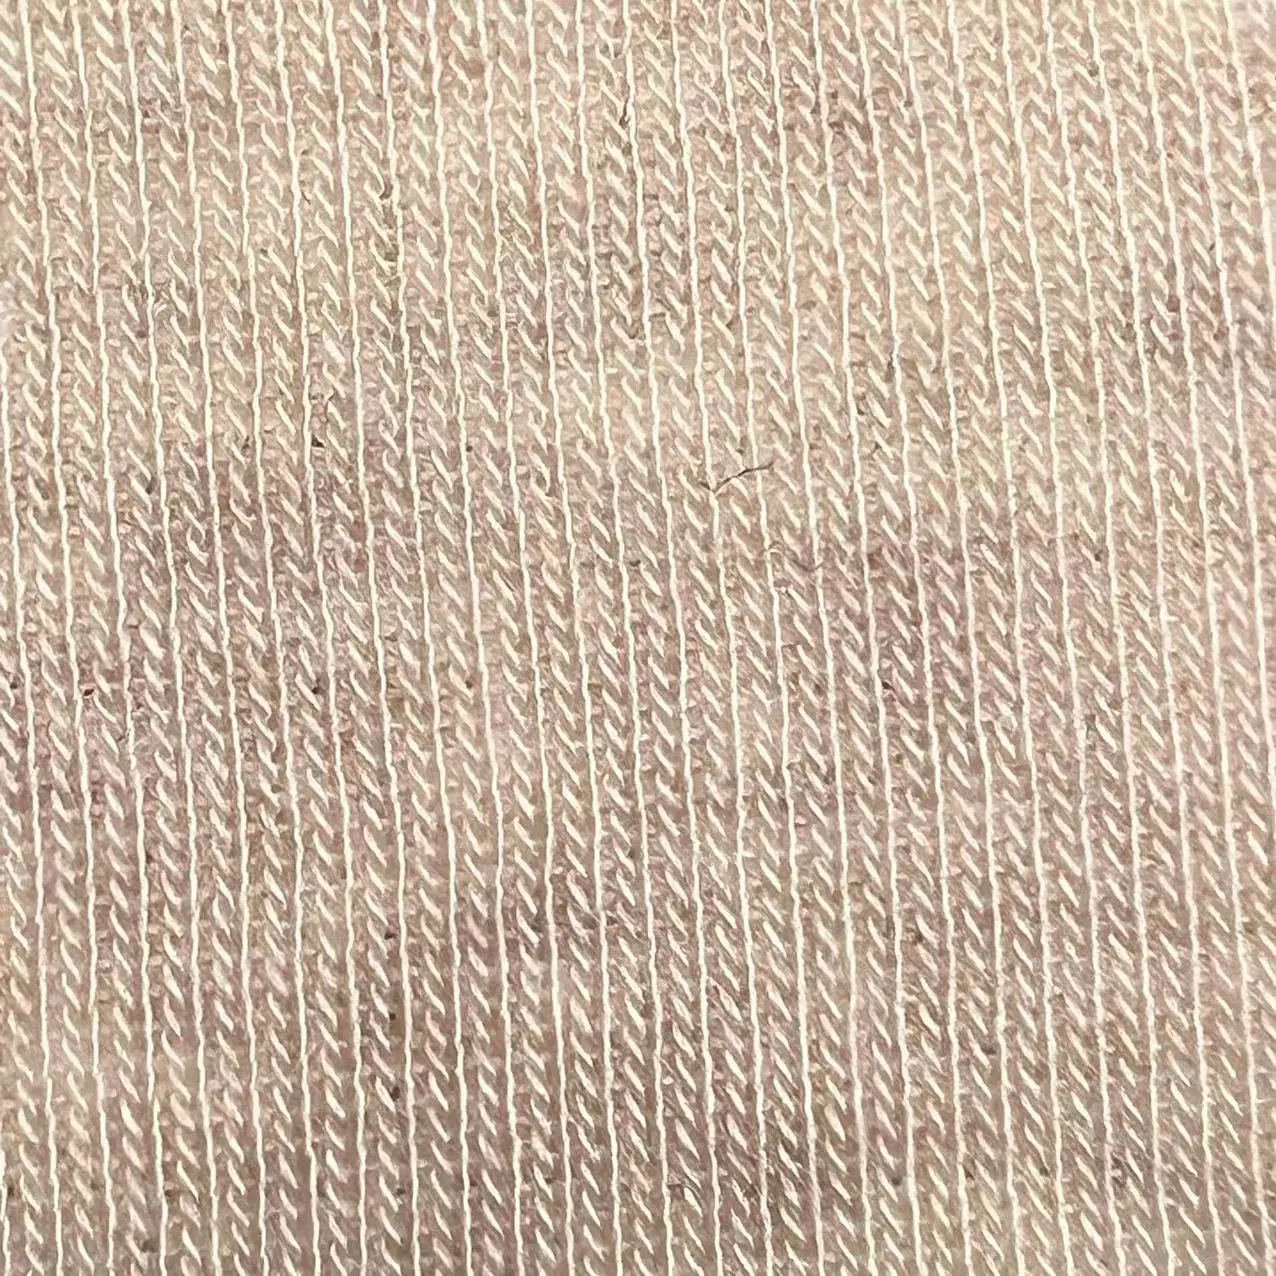 Available Skin Friendly Wool Elastane Loycell Rib for Lingerie Underwear Shirts